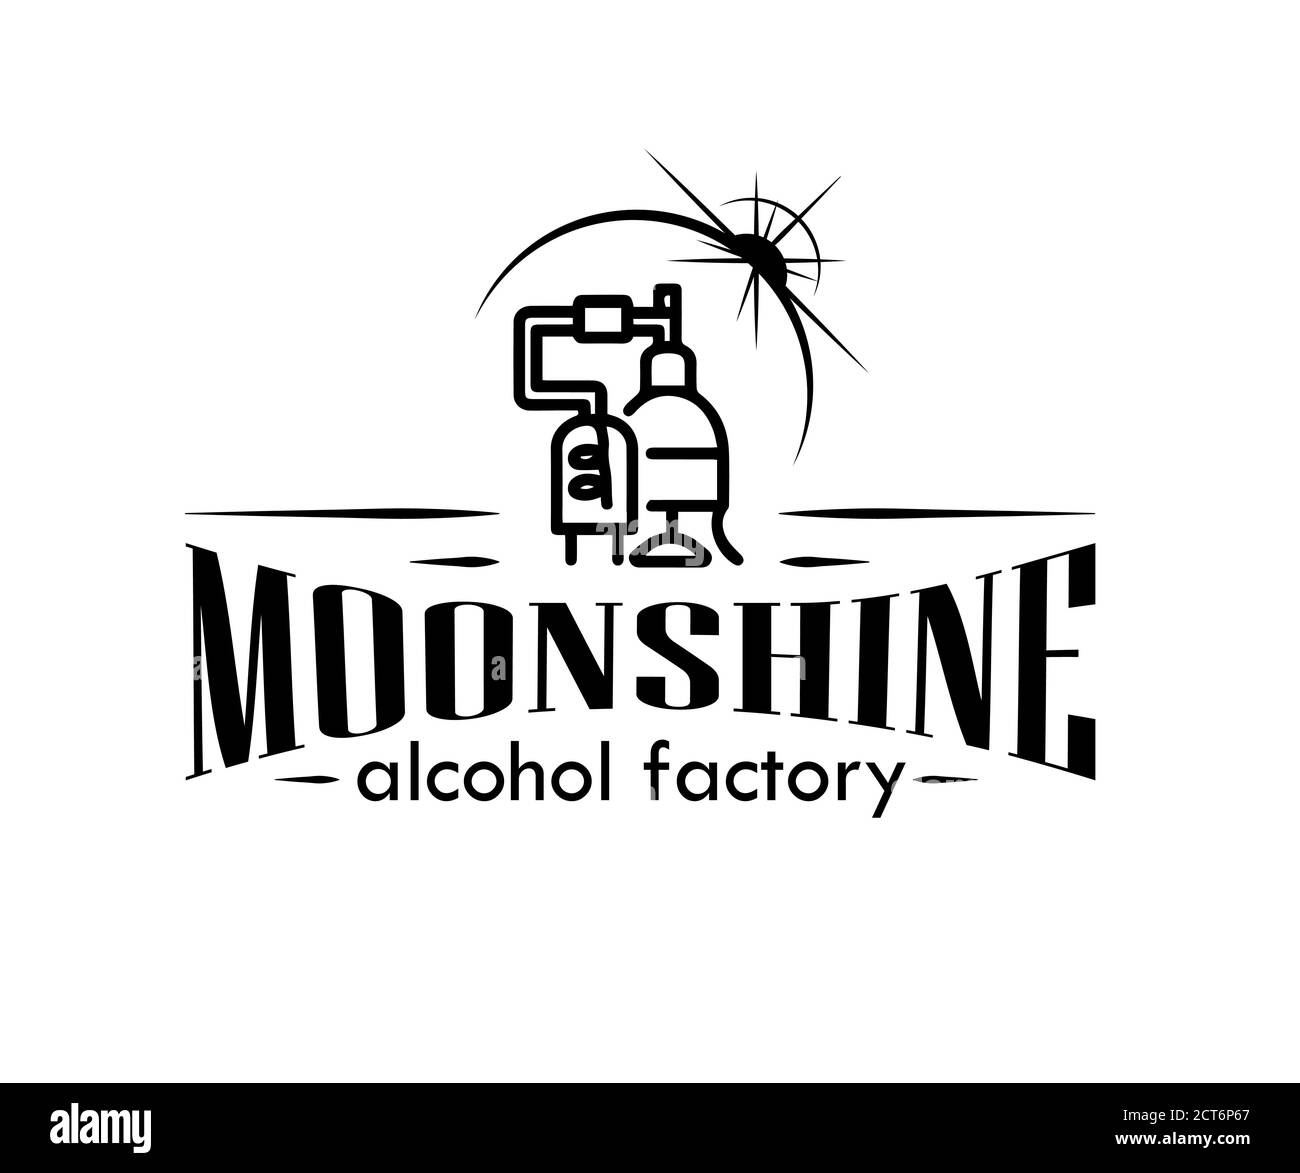 Vintage design of moonshine label with ethnic elements in the style of thin line, bourbon, moonshine and brandy. Black and white vintage logo or label Stock Vector